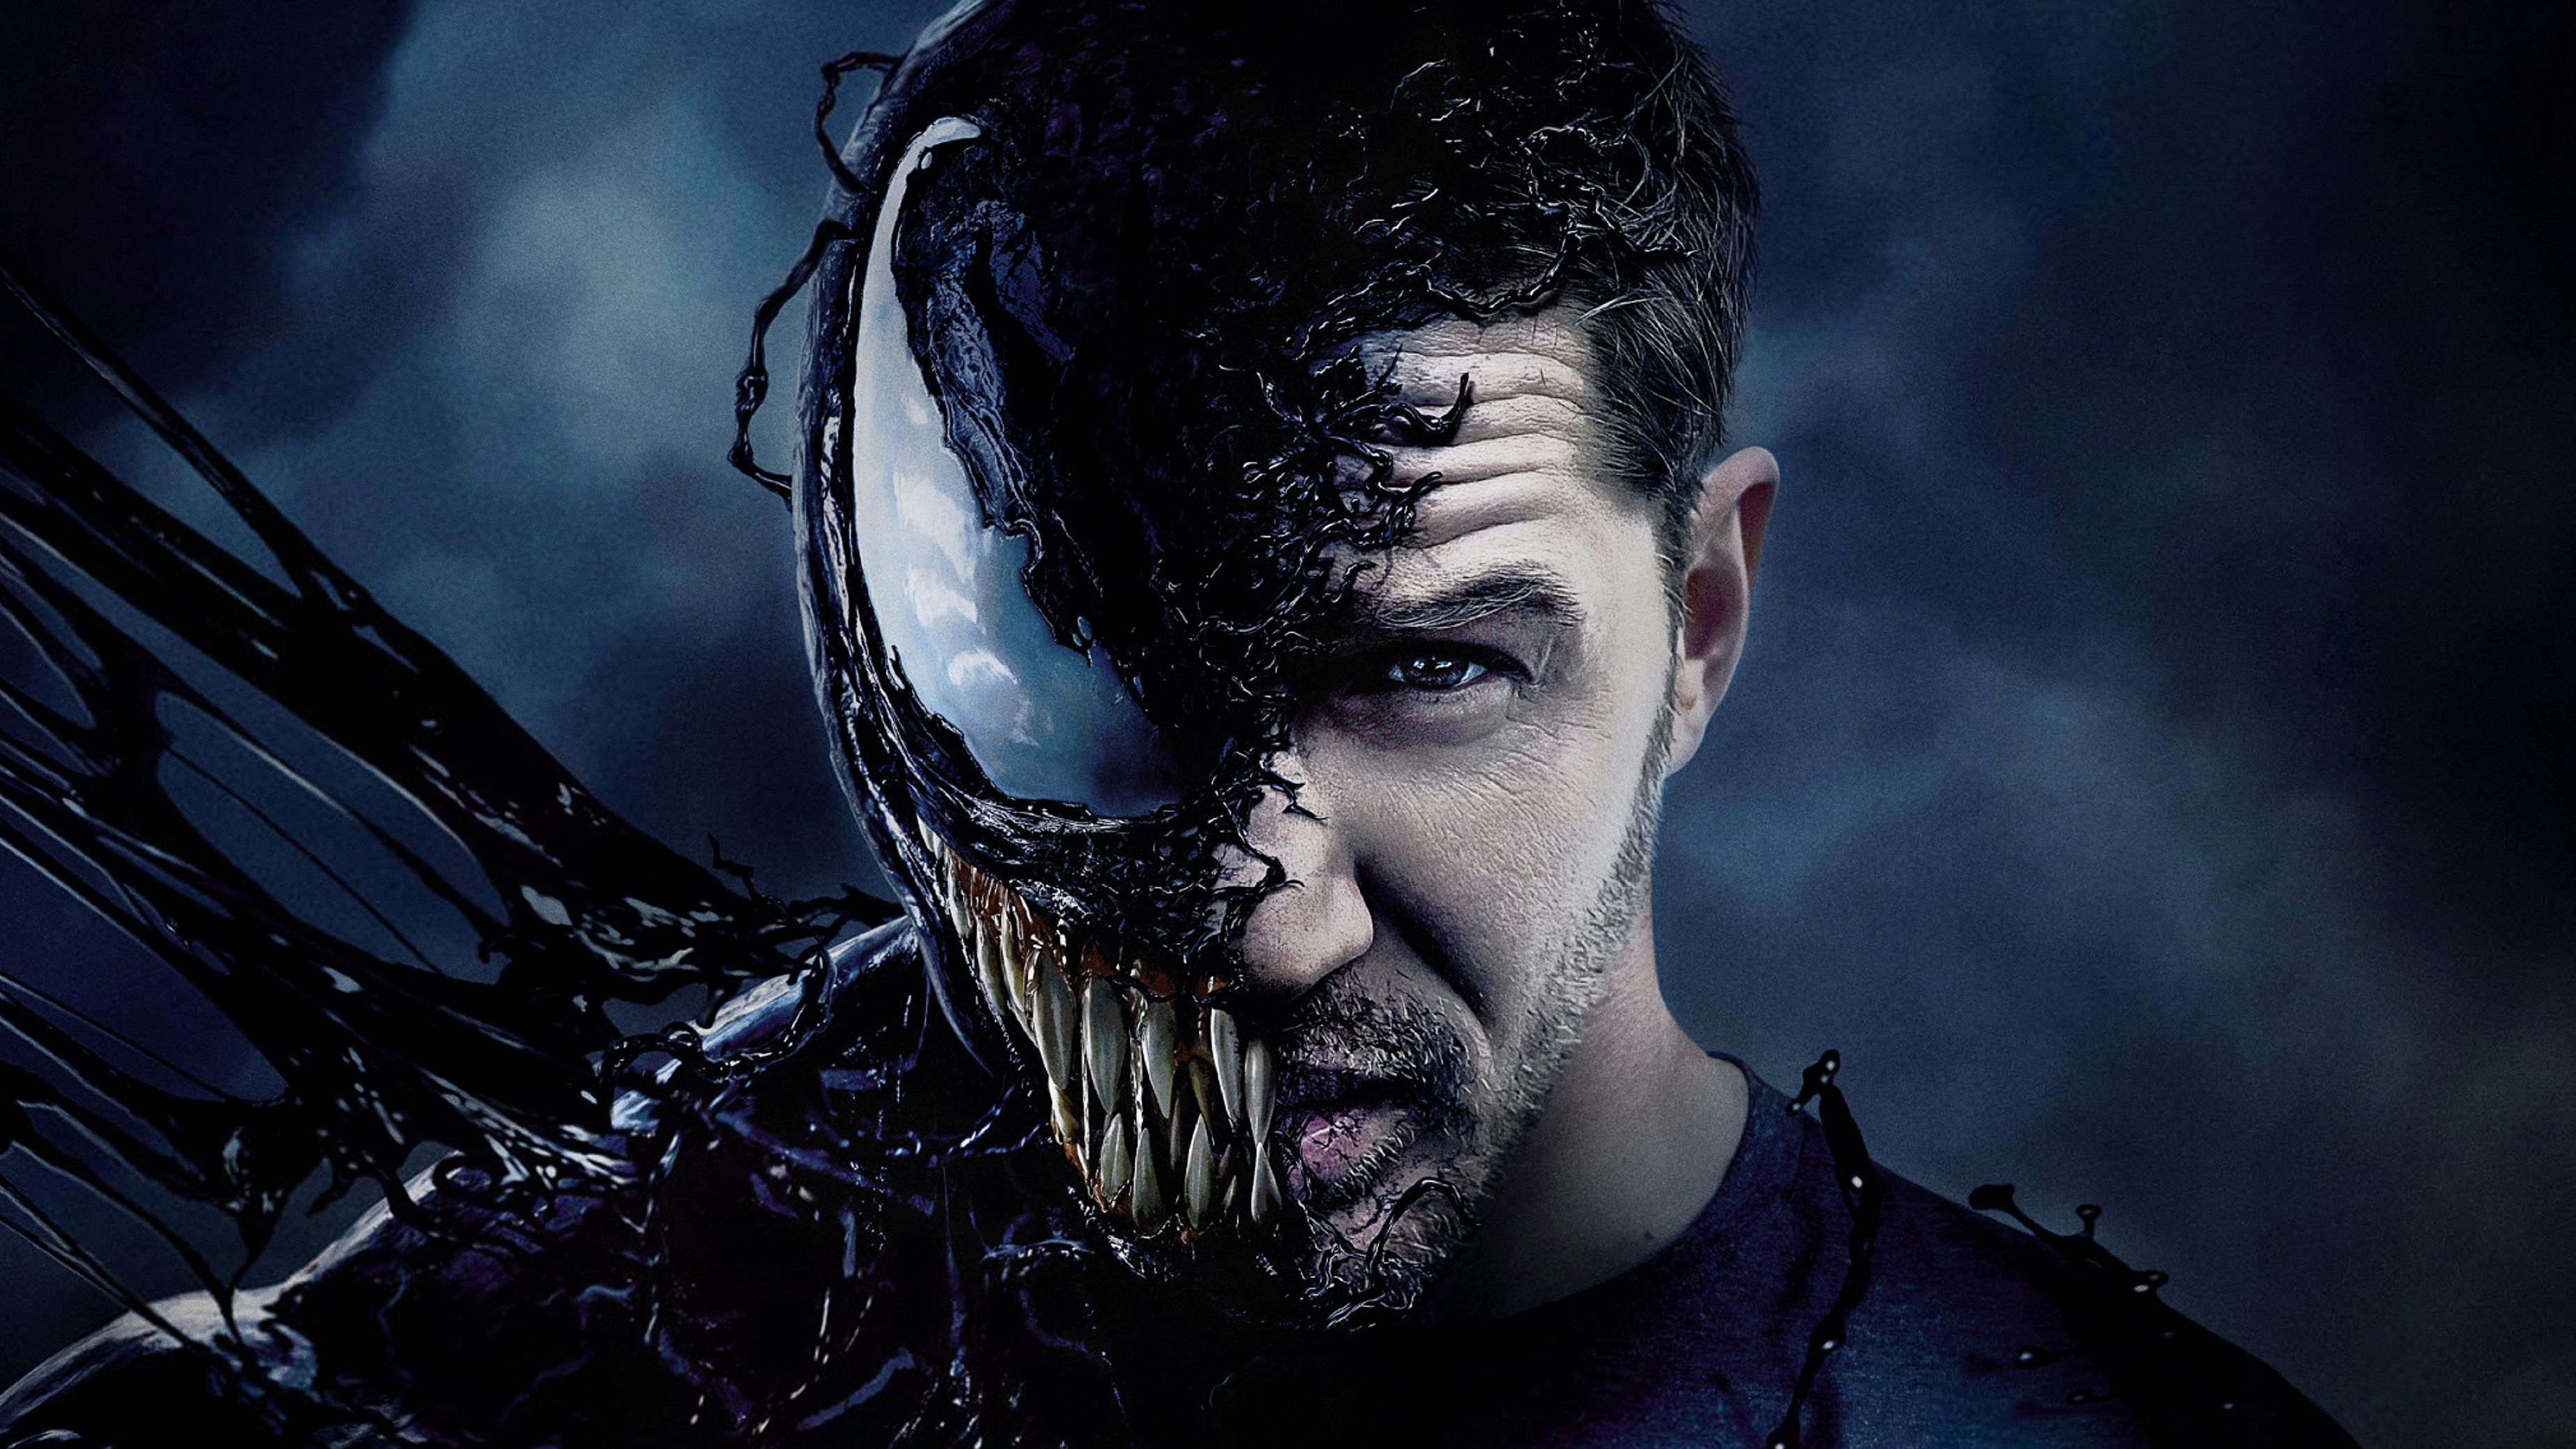 Venom Tom Hardy 4k, HD Movies, 4k Wallpapers, Images, Backgrounds